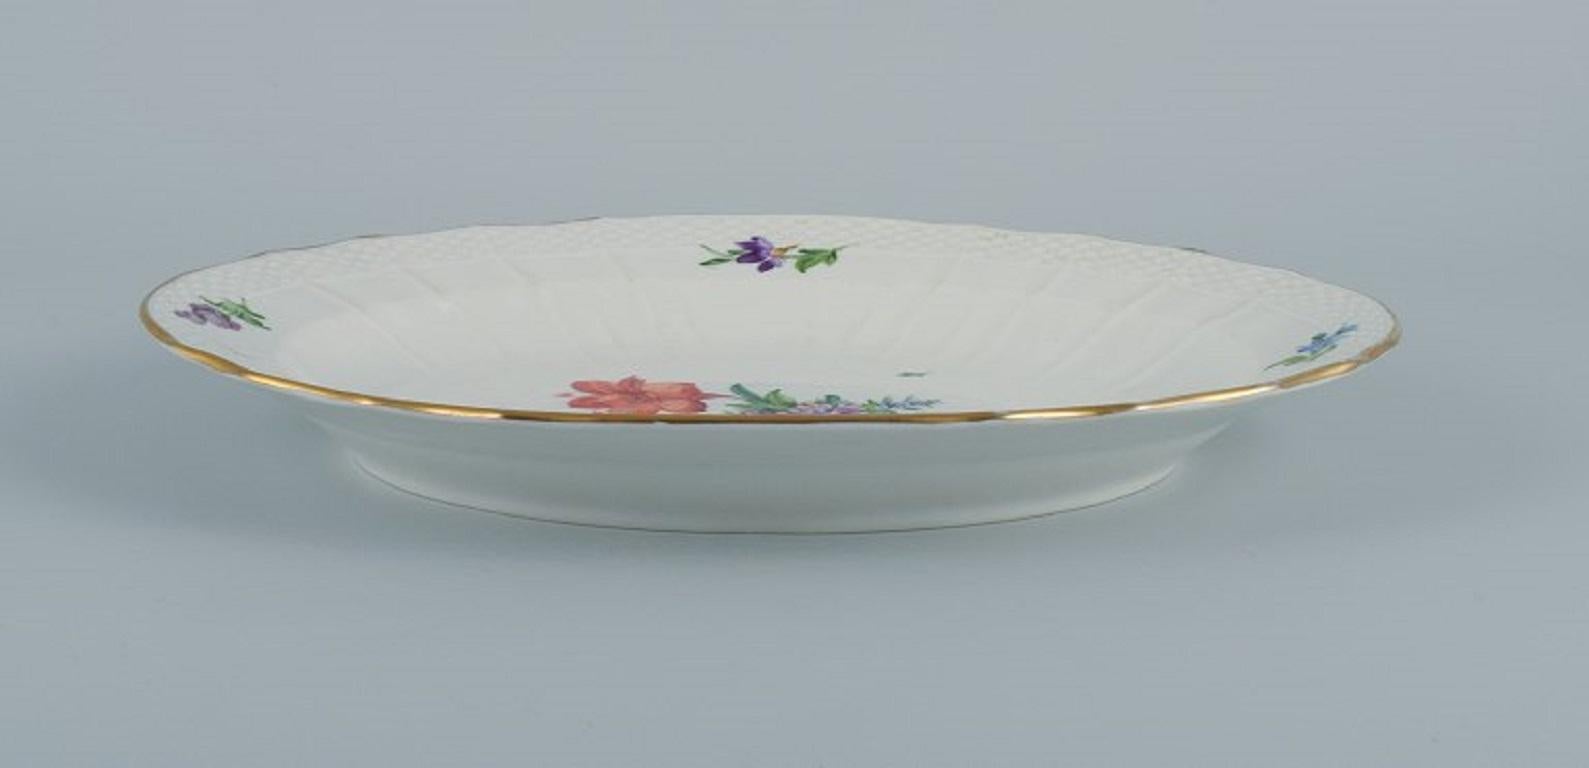 Royal Copenhagen, Saxon Flower.
Oval serving dish in hand-painted porcelain with flowers and gold decoration.
Model number 493/1555.
Early 20th century.
In excellent condition.
Marked.
Second factory quality.
Measures: 30.0 x 23.0 cm.